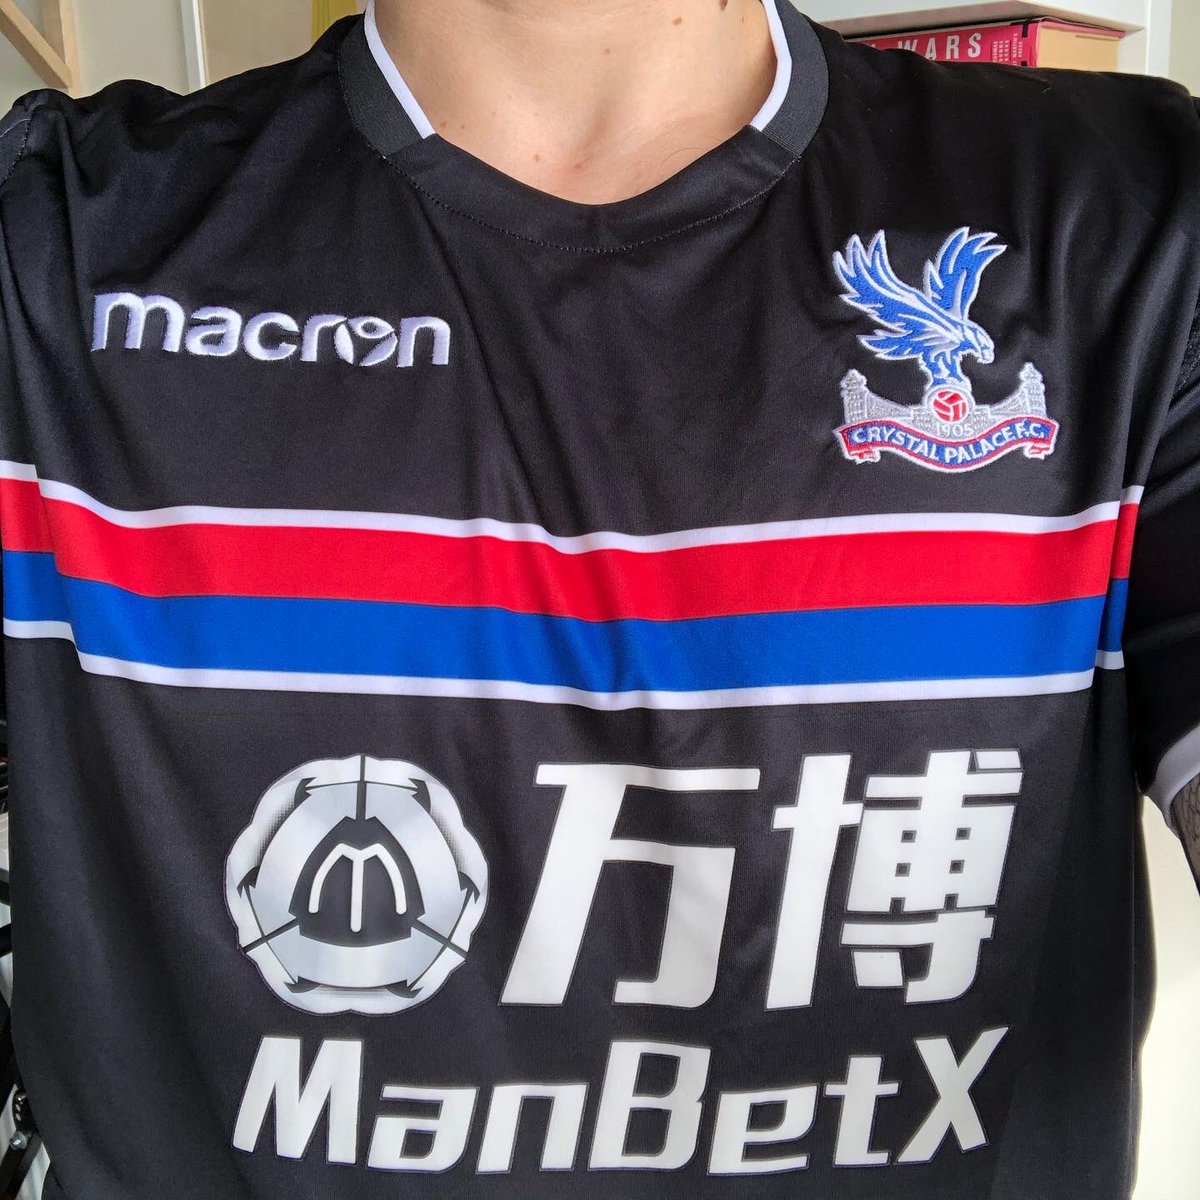 . @CPFCAway Kit, 2017/18 @MacronSportsEasily one of my favourite  #CrystalPalace shirts of the past few years. Boy am I a sucker for black football tops. The rather tight fit looked better on Benteke than on yours truly. #HomeShirt  #CPFC  #ClassicFootballShirts